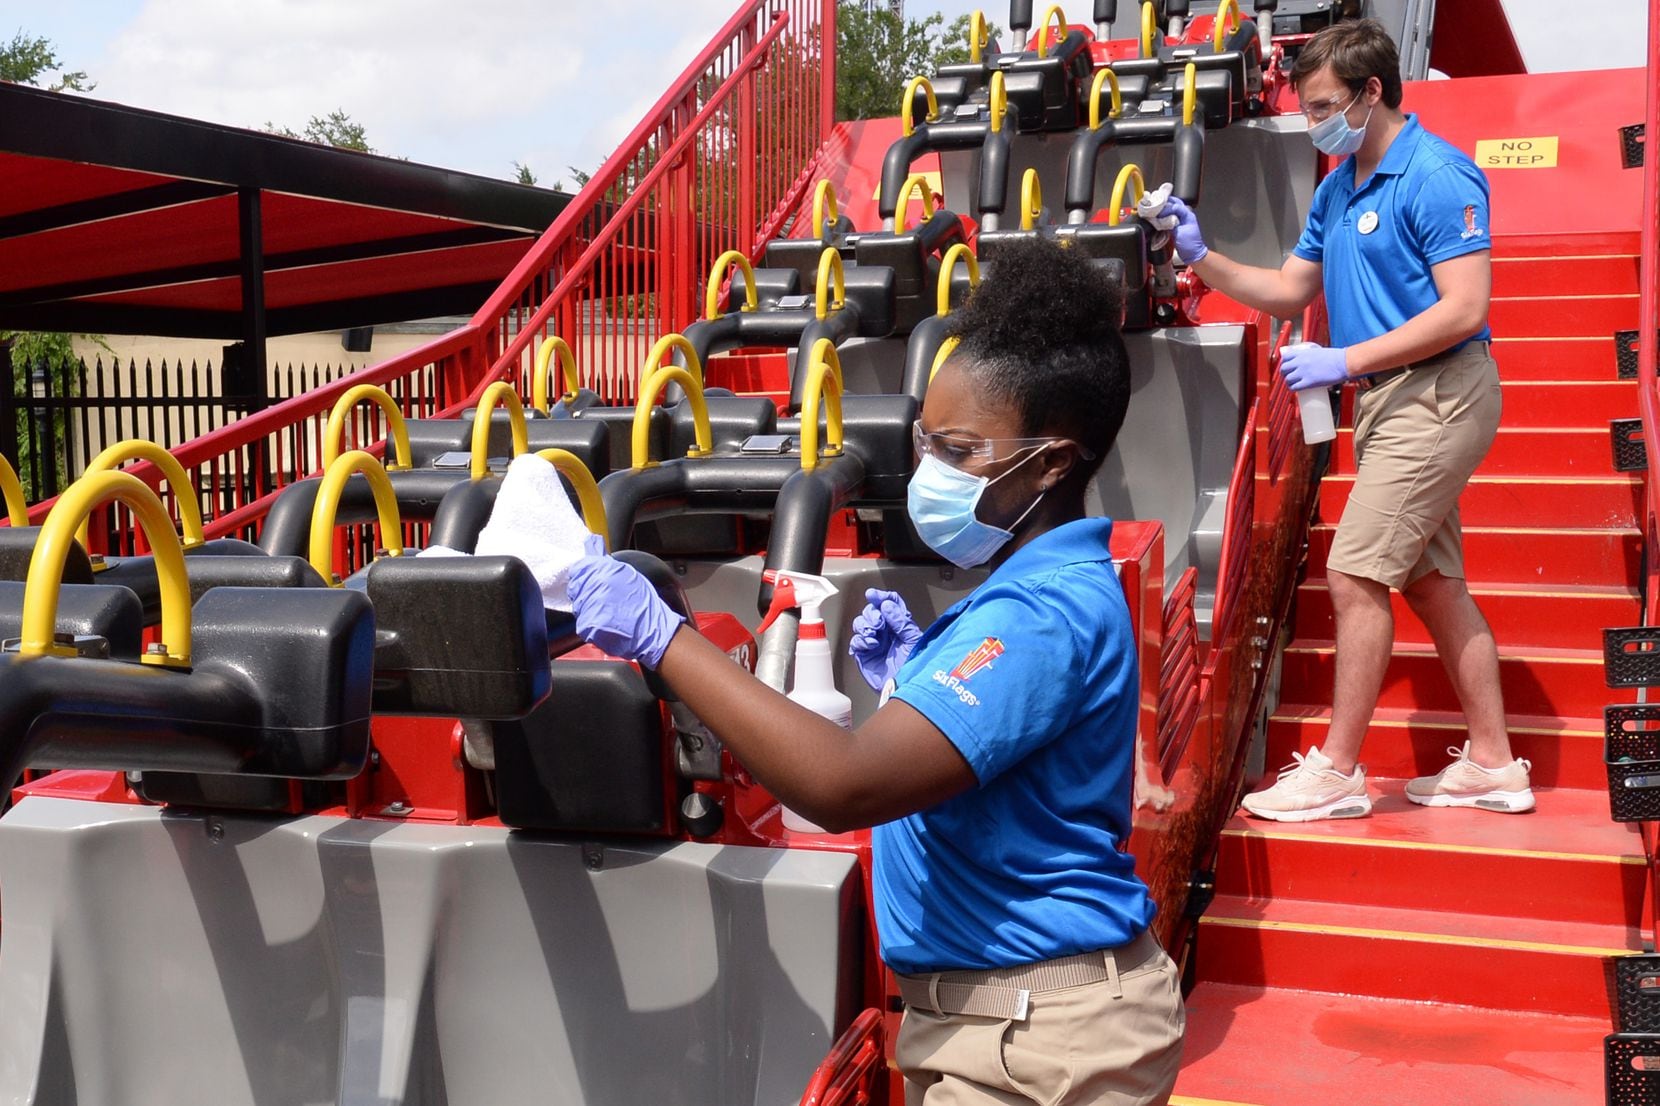 Six Flags employees spent considerable time in 2020 cleaning rides, restraints and railings to make parkgoers more at ease with safety protocols.